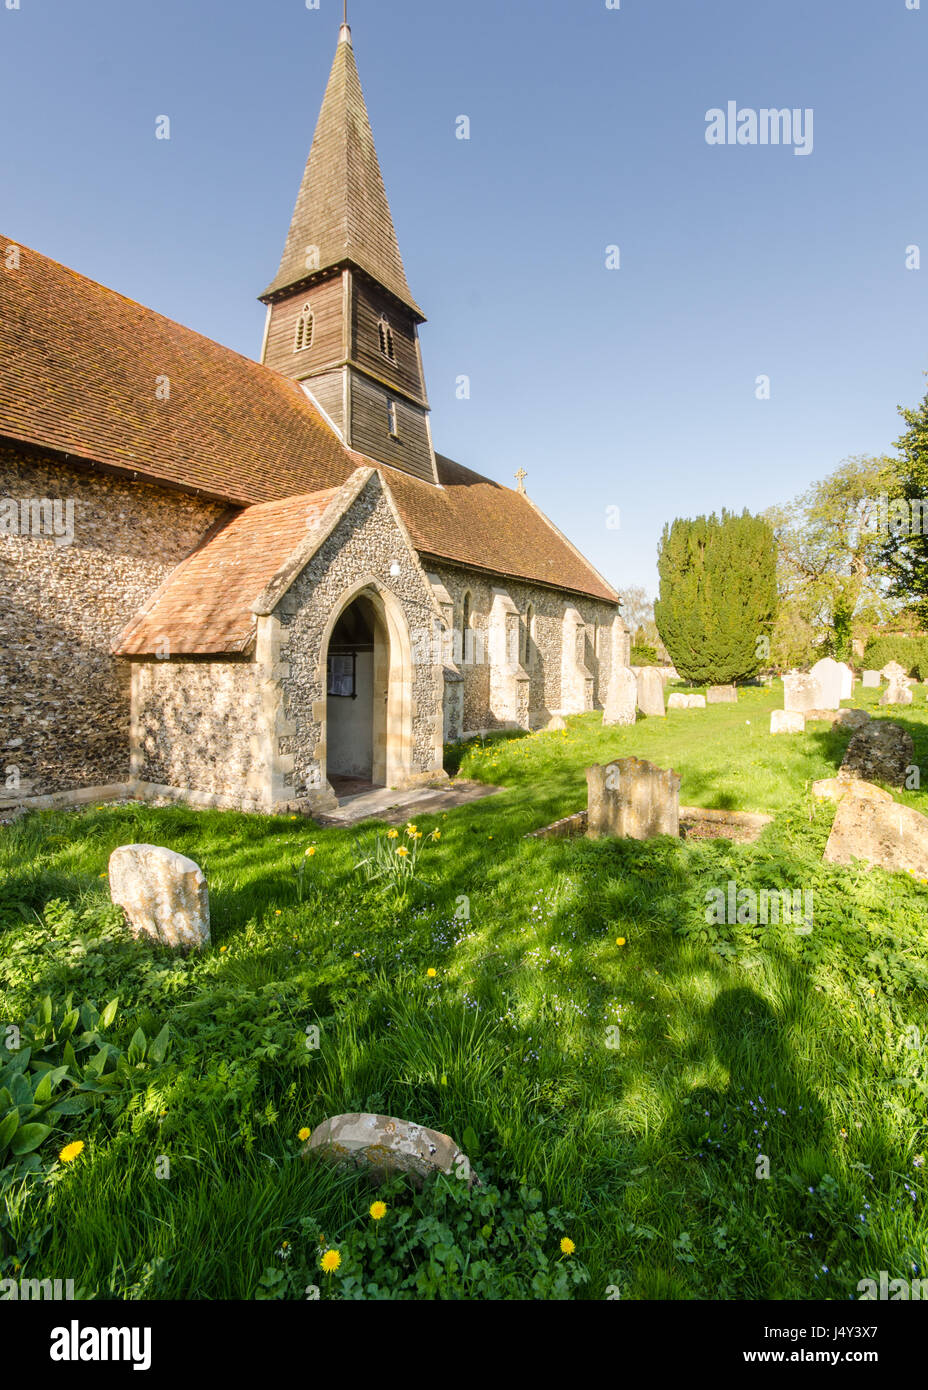 Thame, England, UK - April 18, 2015: Spring sunshine on the church, spire and graveyard of St Mary's Church in Sydenham, near Thame, Oxfordshire. Stock Photo